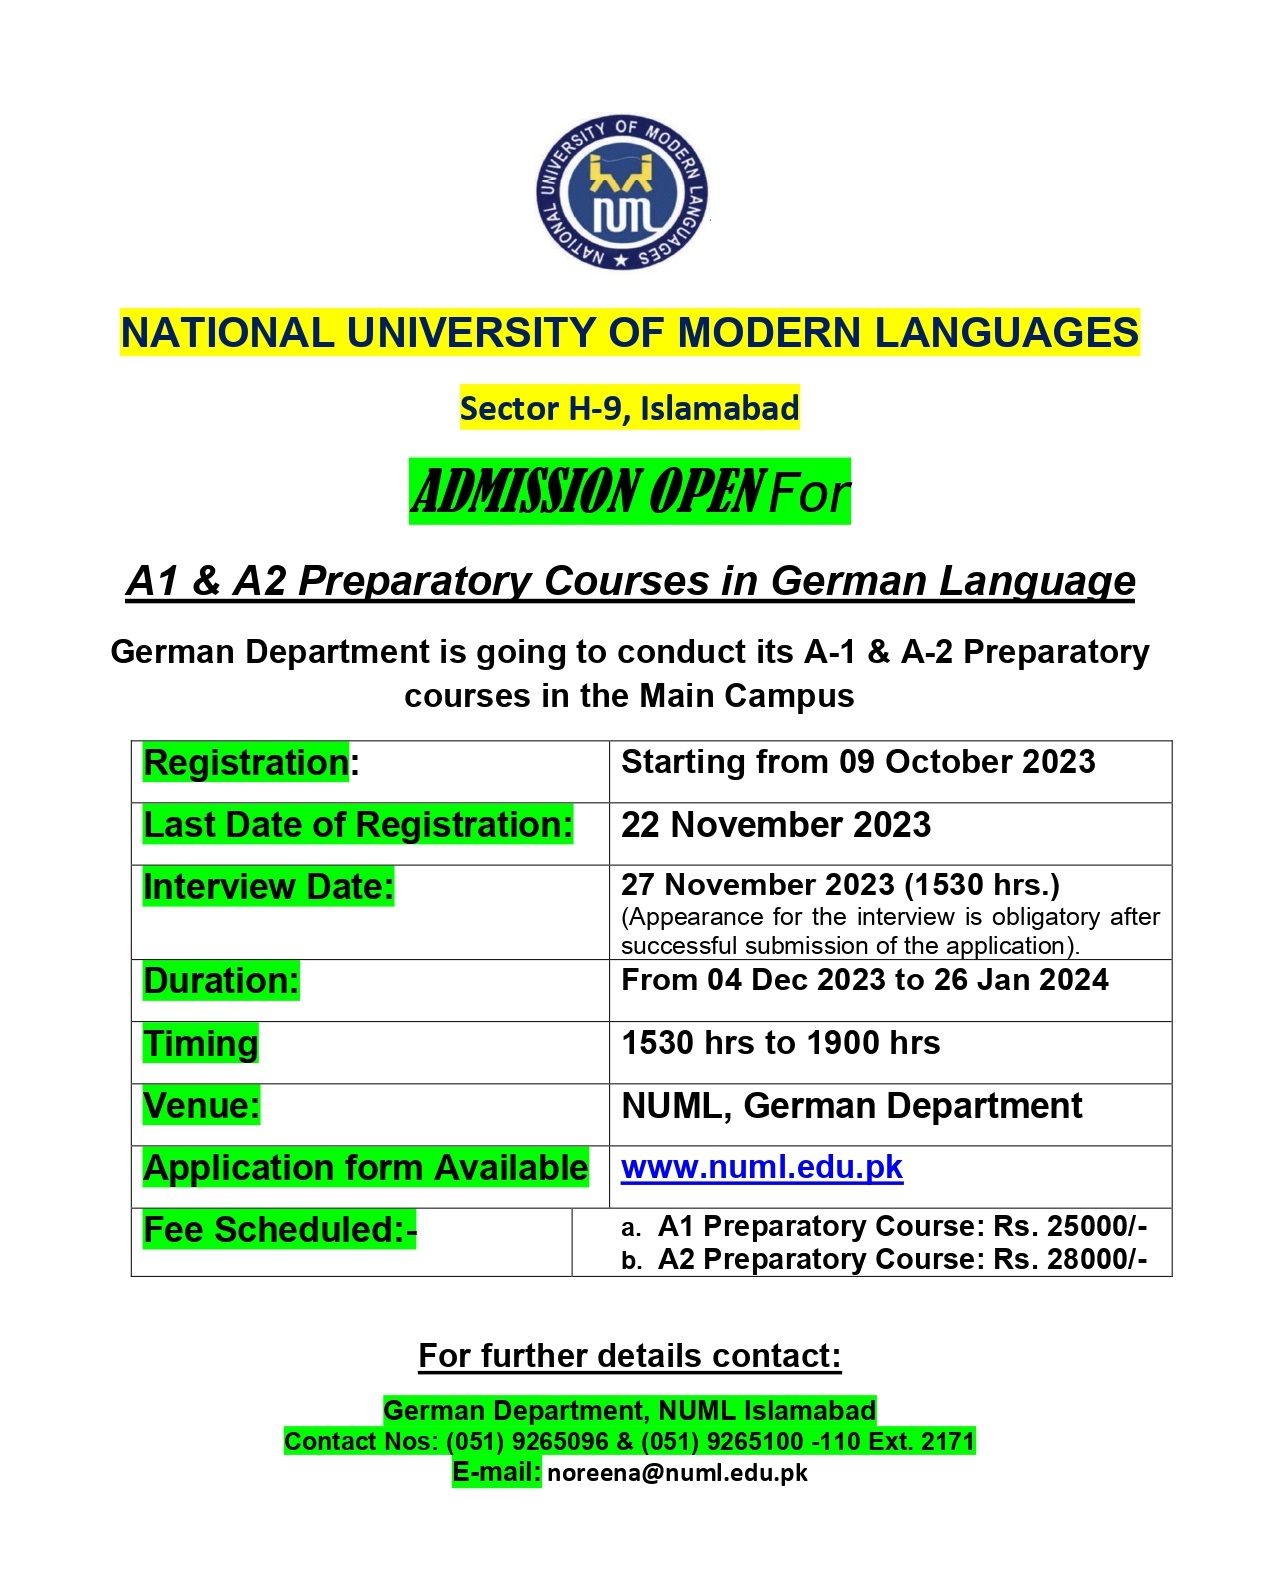 ADMISSION OPEN For A1, A2 Preparatory courses in German Language